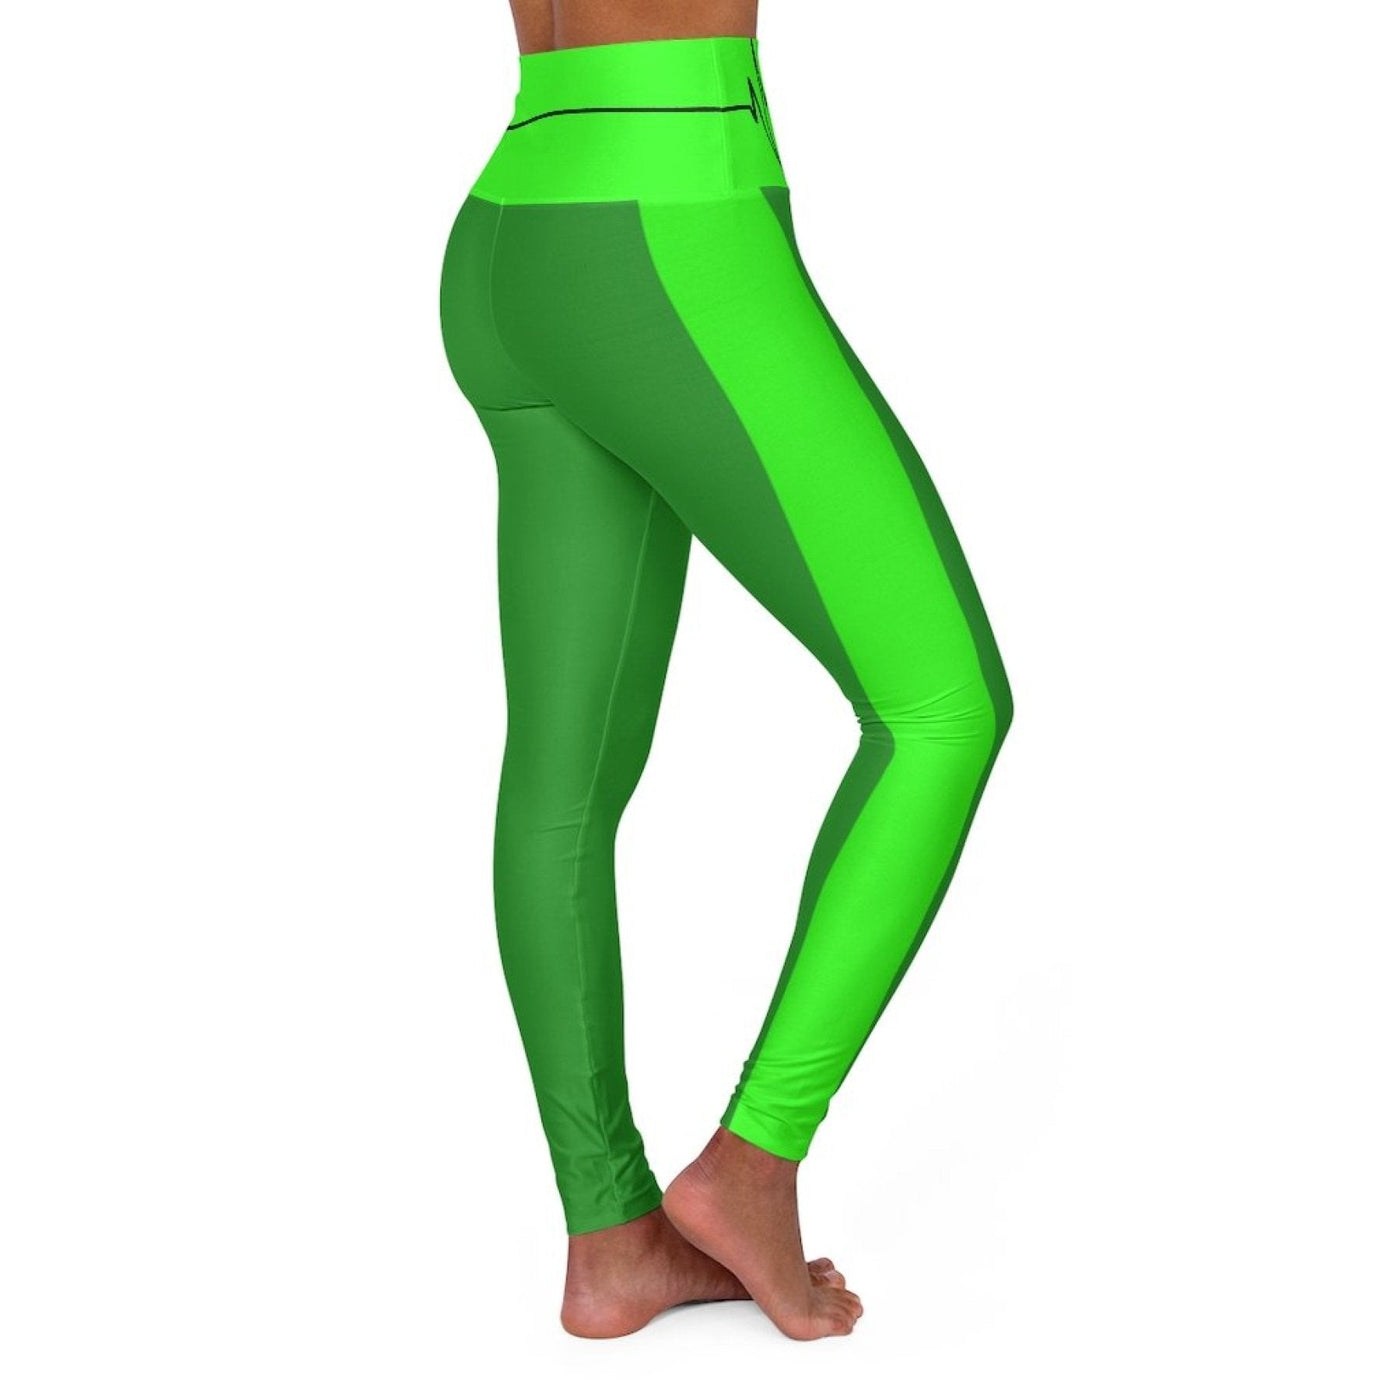 High Waisted Yoga Leggings Forest Green And Neon Green Black Bordered Beating